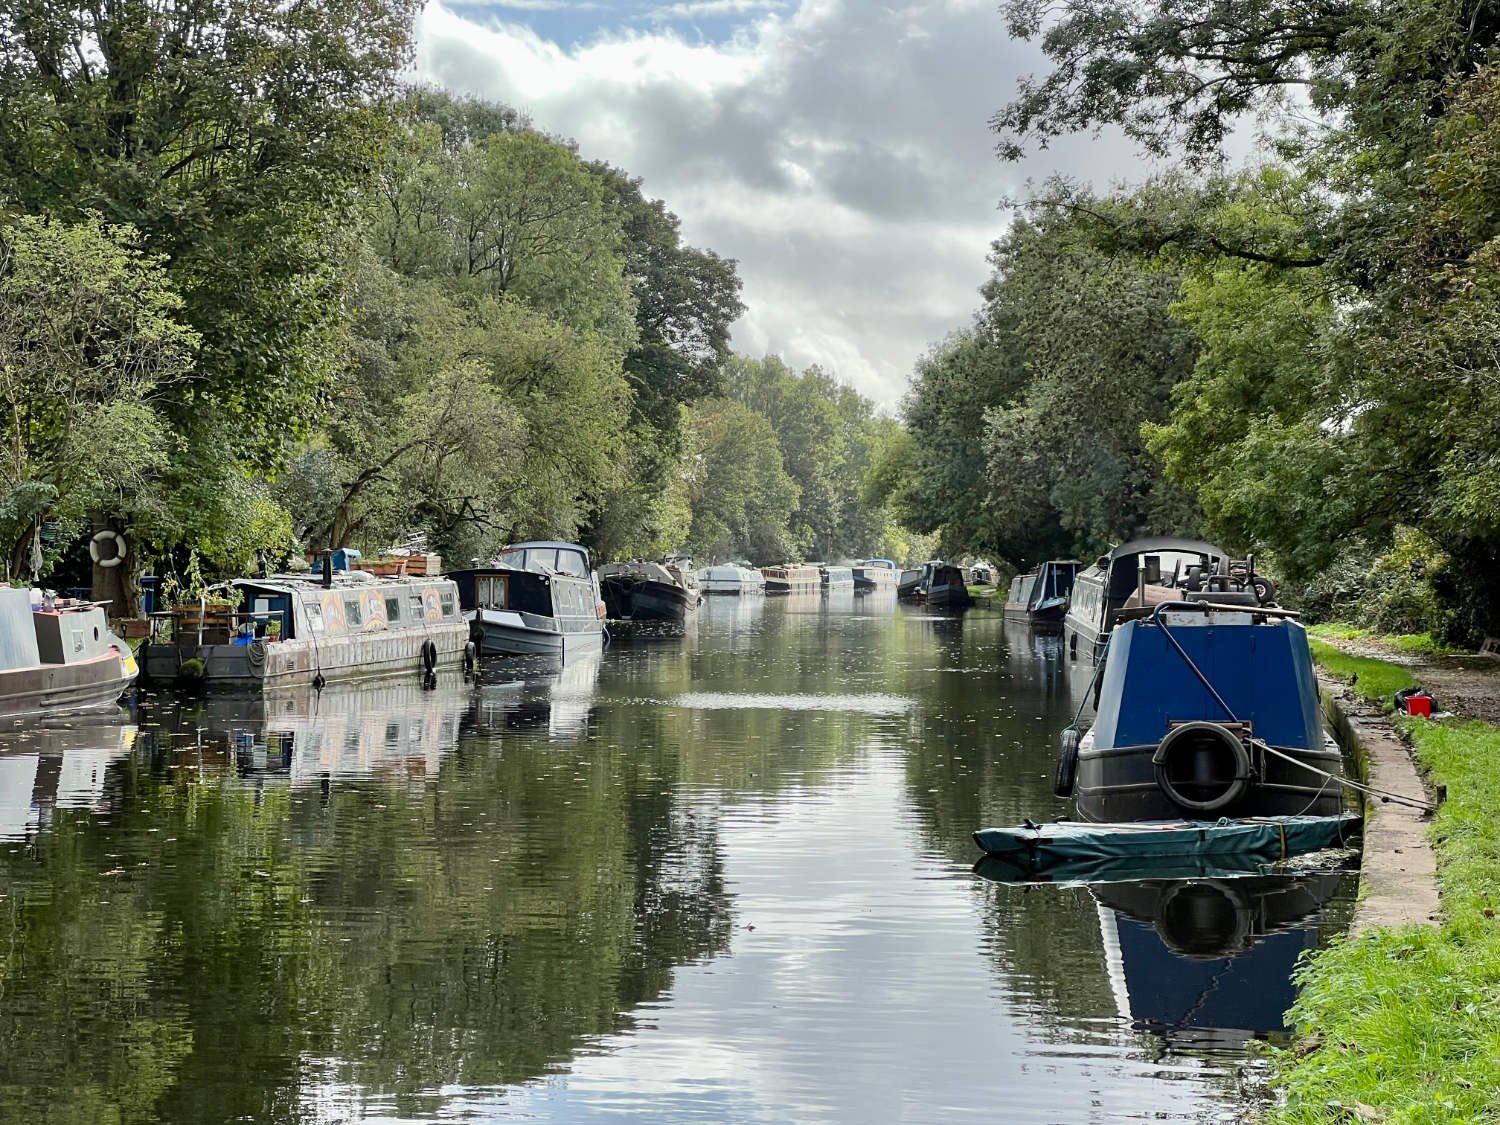 The Grand Union Canal, Cowley